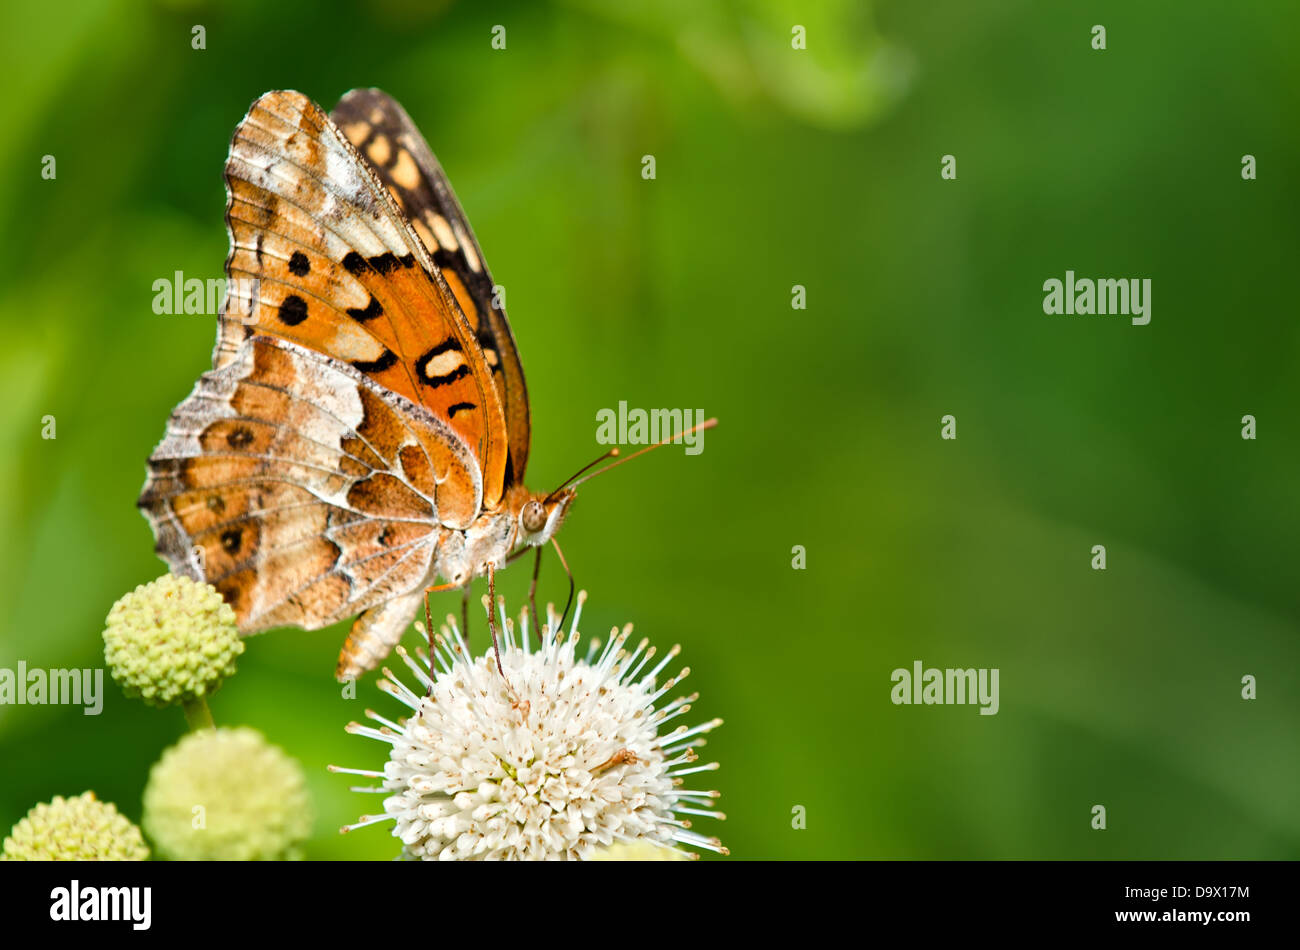 Variegated Fritillary butterfly (Euptoieta claudia) feeding on buttonbush flowers. Soft green background with copy space. Stock Photo